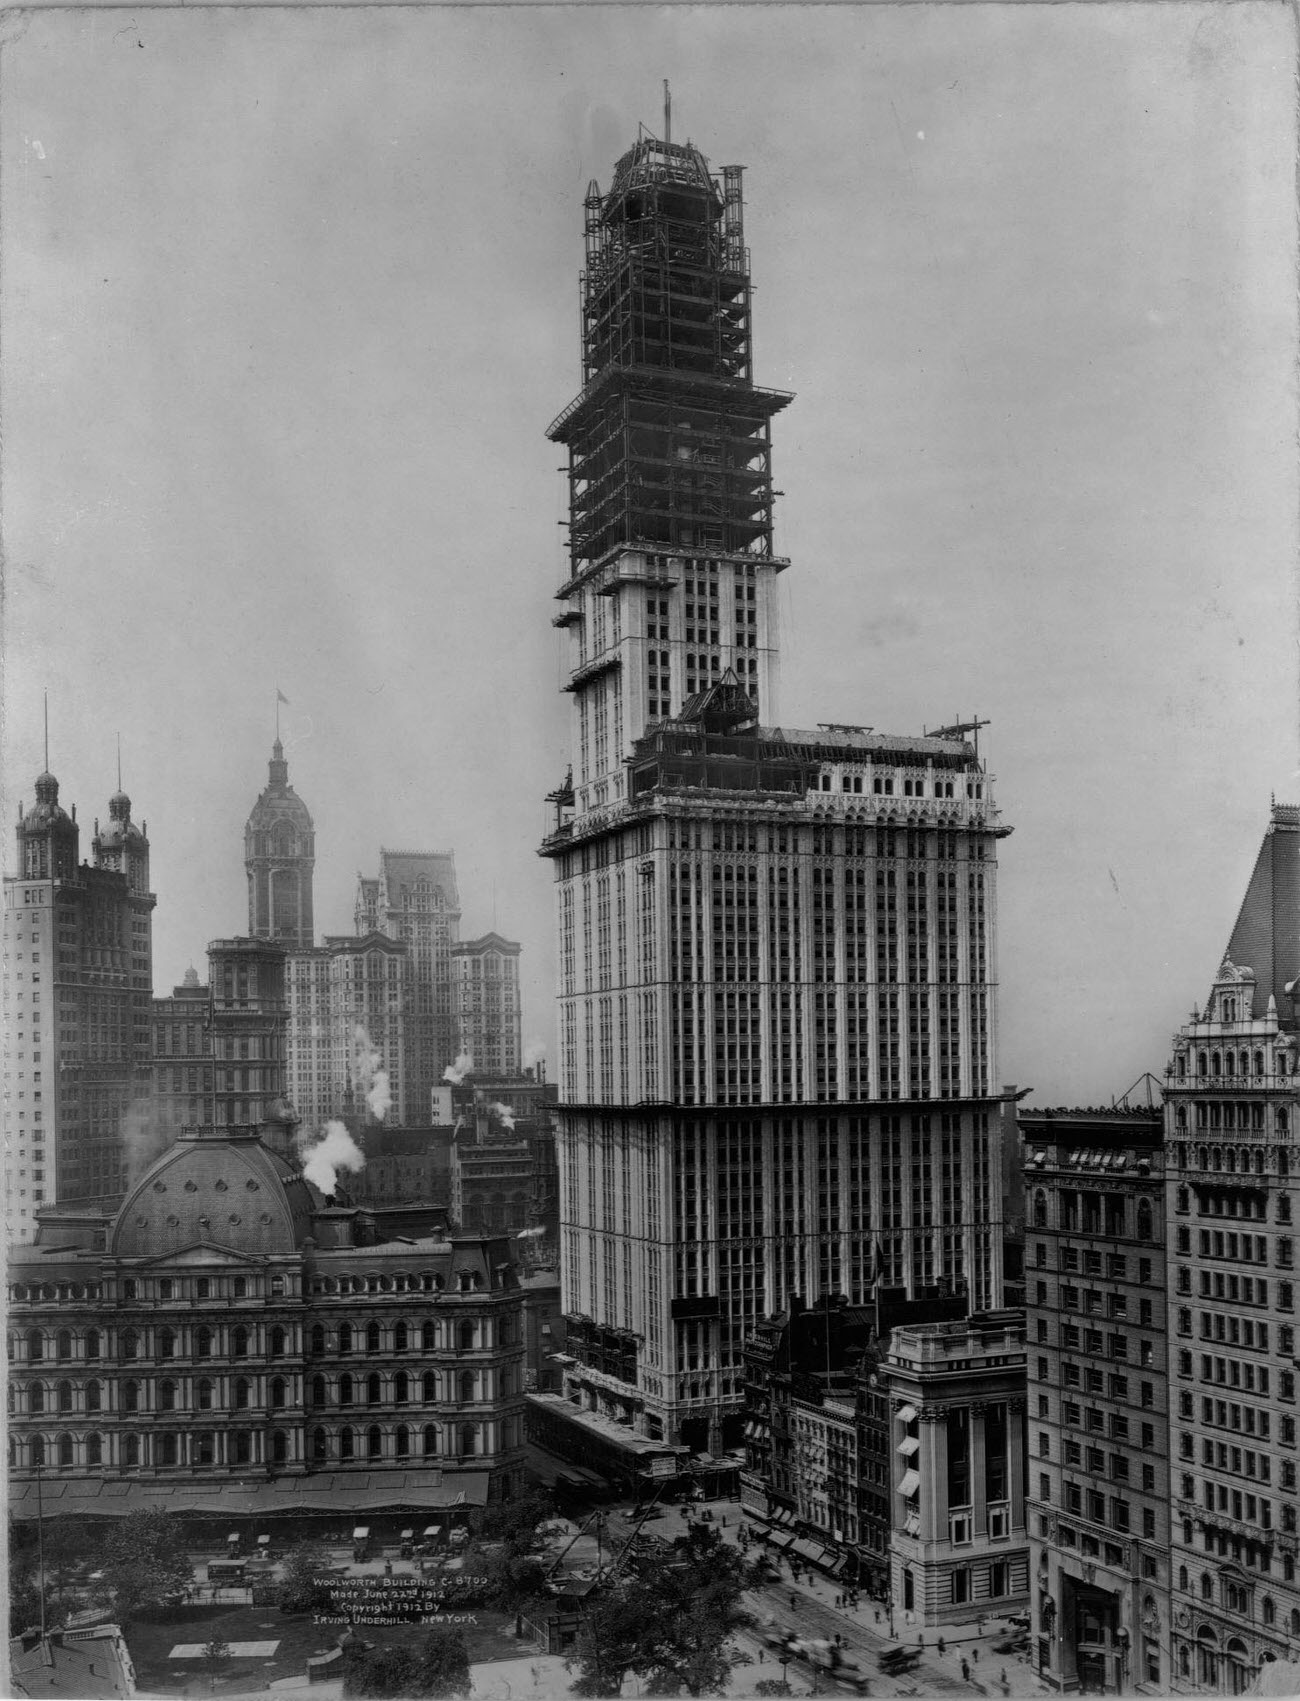 A View Of The Woolworth Building Under Construction, 1913